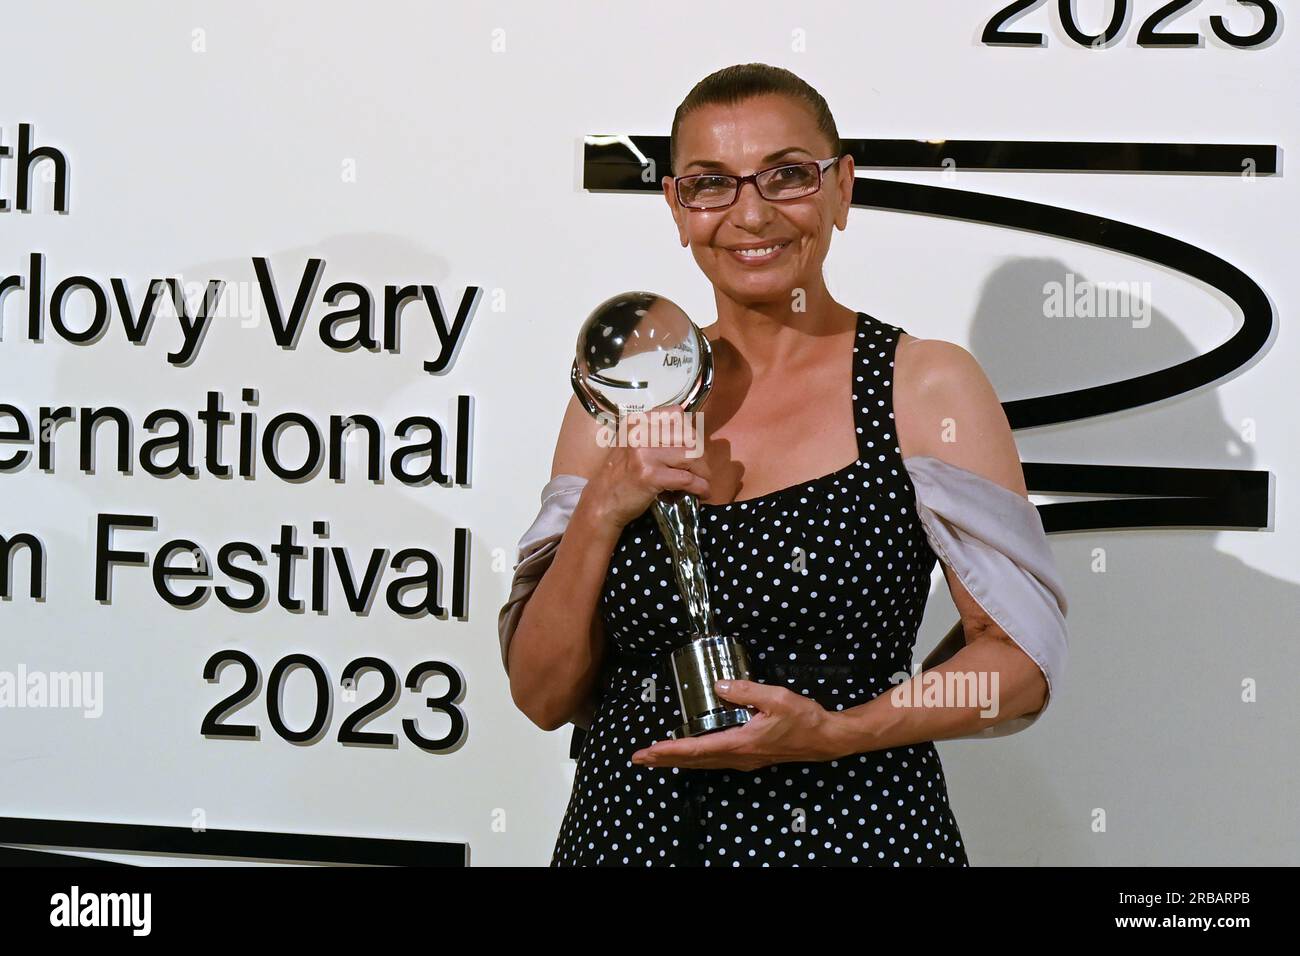 Karlovy Vary, Czech Republic. 08th July, 2023. The last day of the 57th Karlovy Vary International Film Festival, 8 July 2023. Bulgarian actress Eli Skorcheva receives the award for Best Actress for her role in the film Blaziny lekce at the closing ceremony. Credit: Slavomir Kubes/CTK Photo/Alamy Live News Stock Photo